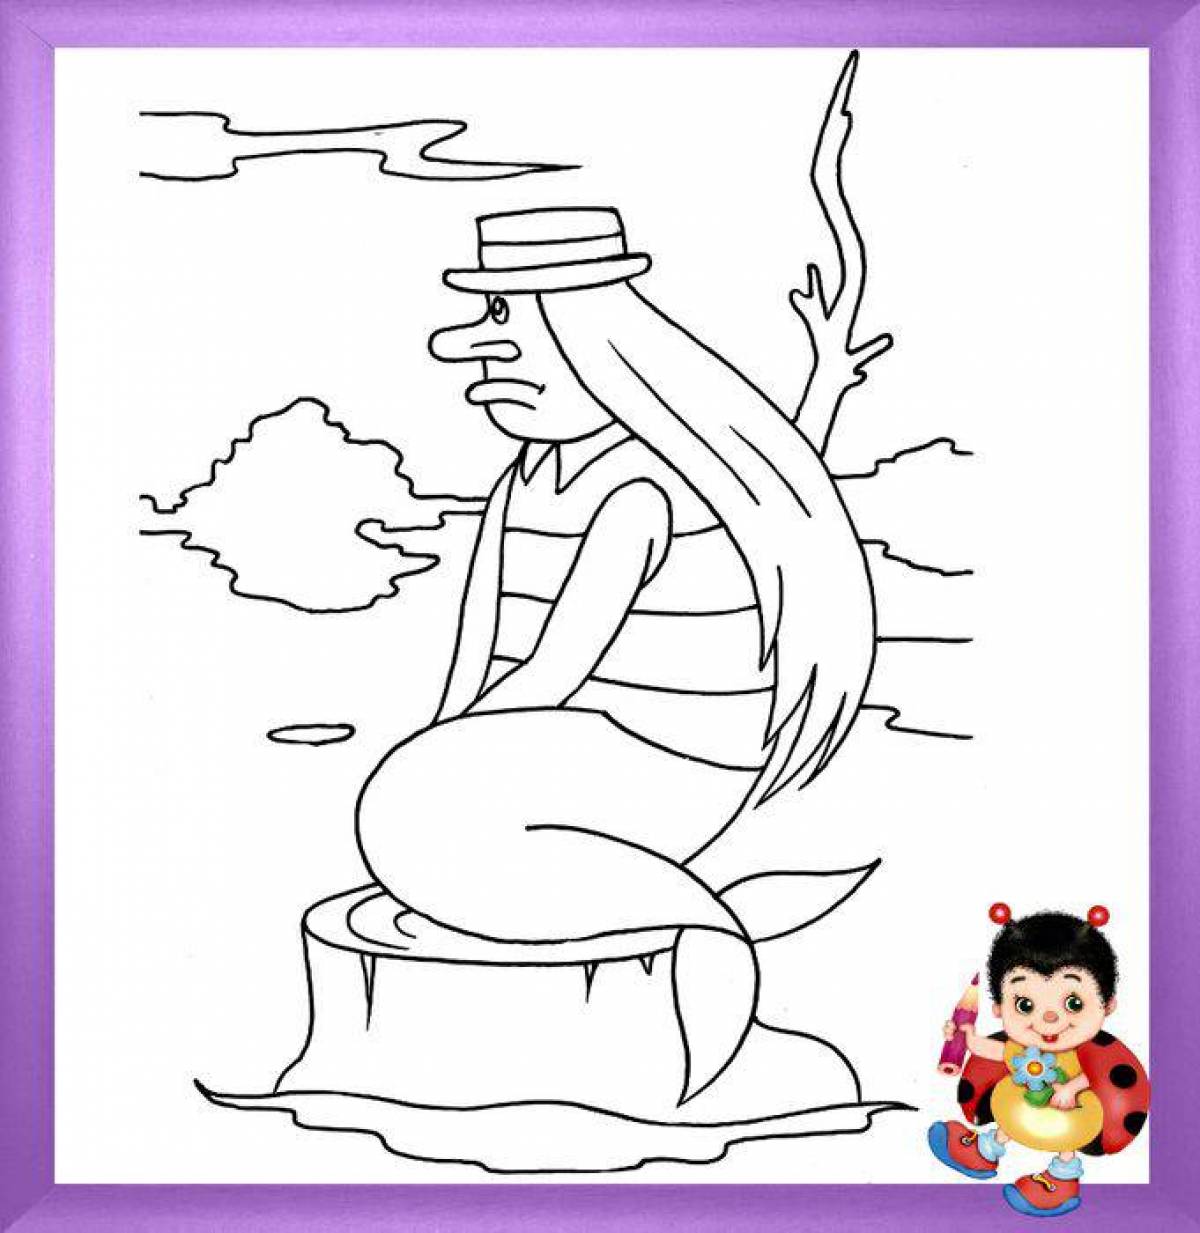 Calm water coloring page